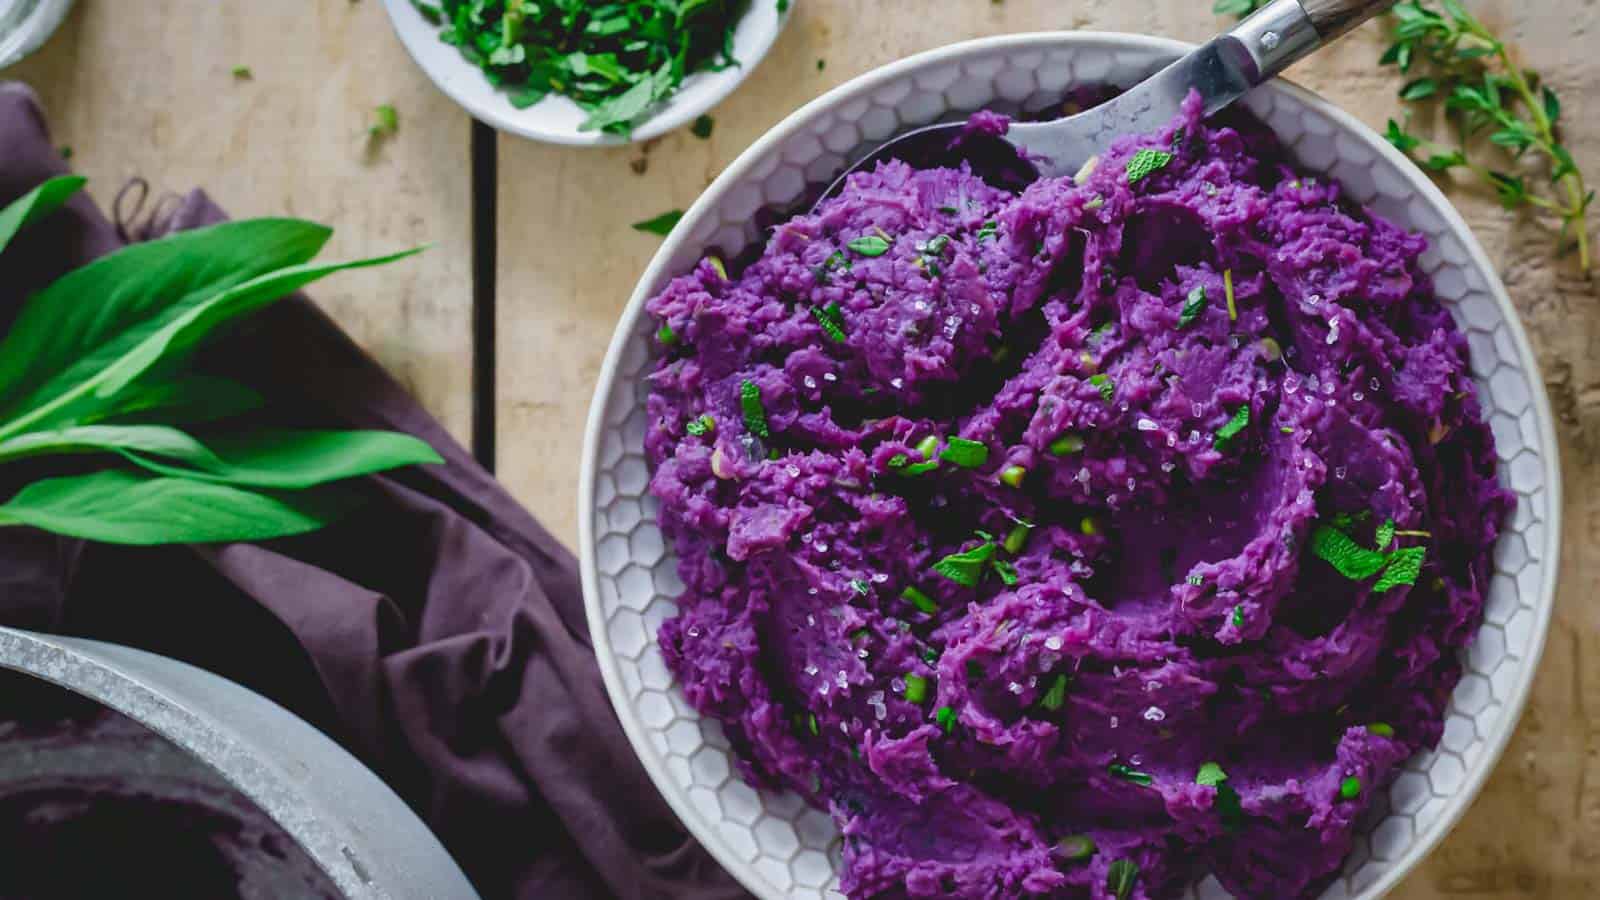 Mashed purple sweet potatoes in a bowl with a serving spoon.